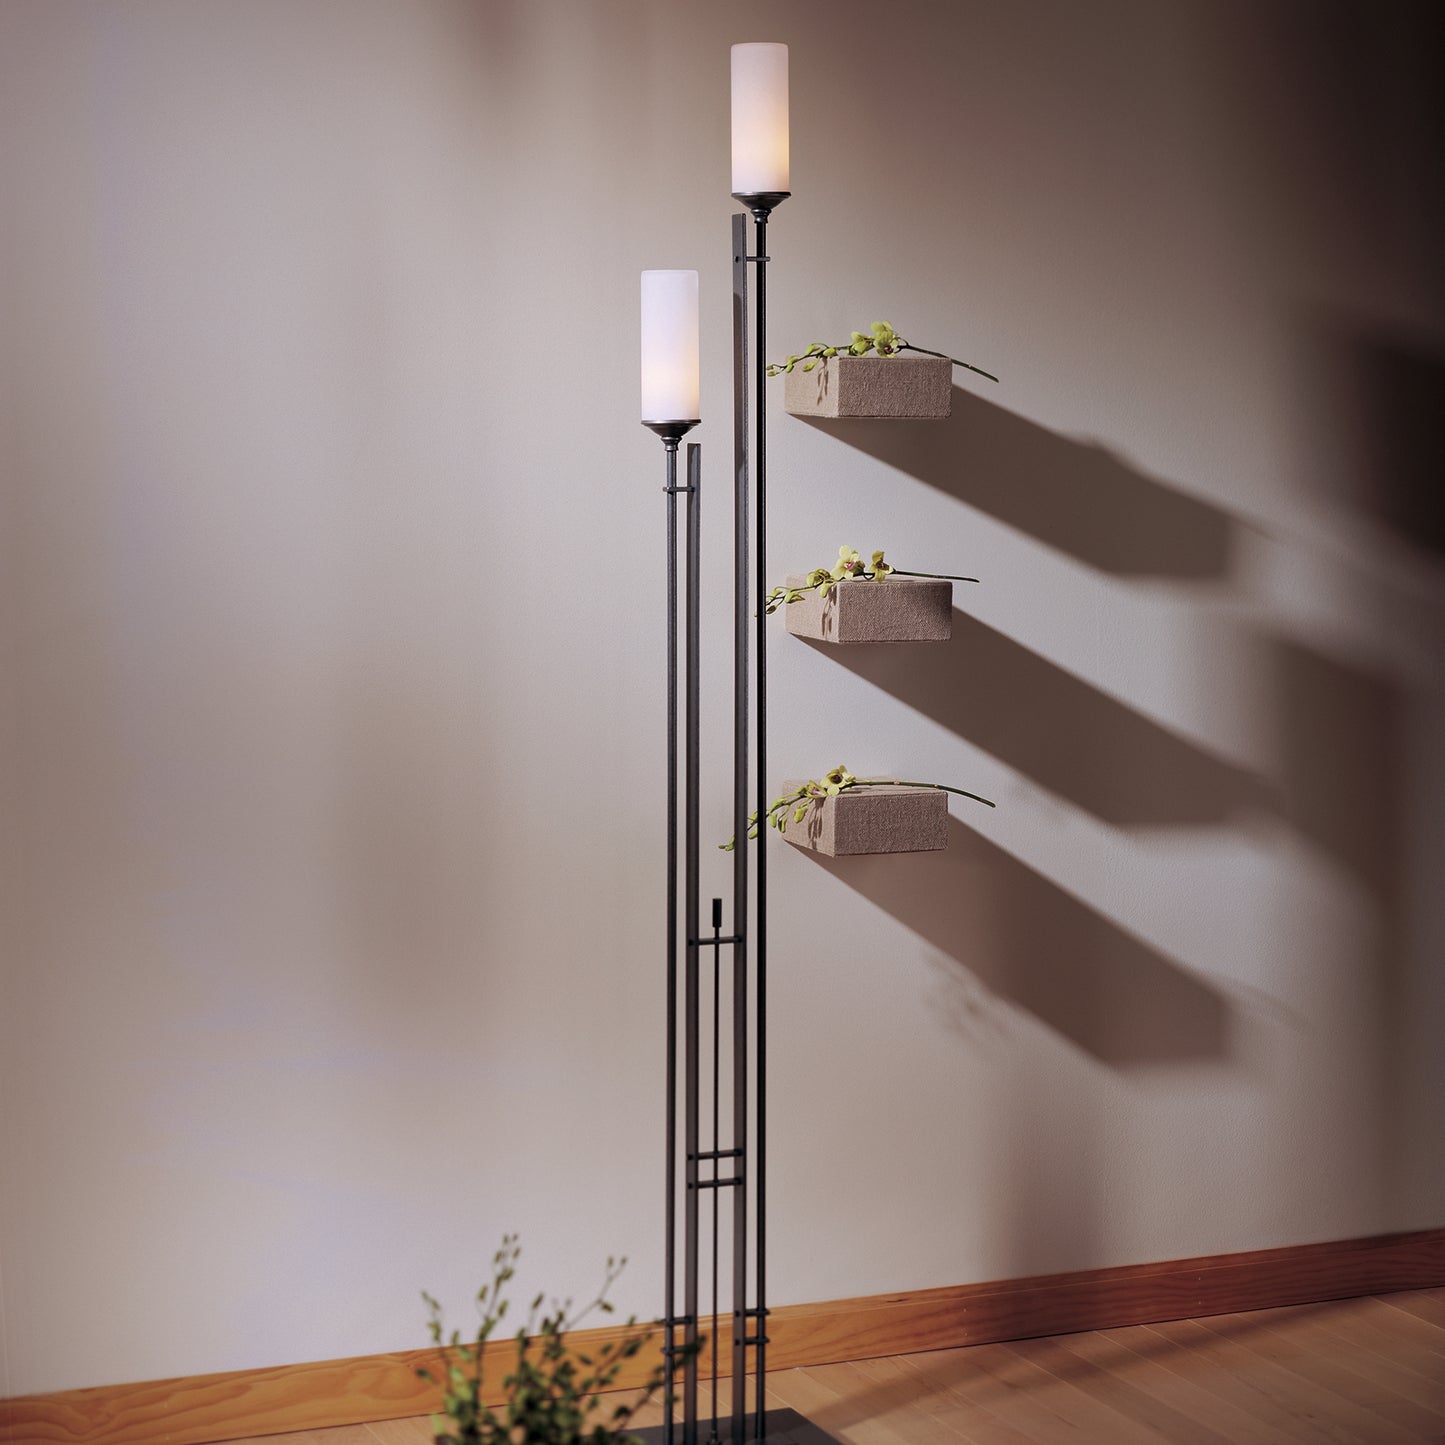 A Hubbardton Forge Tall Metra Twin Floor Lamp with ambient lighting, featuring a decorative plant on top.